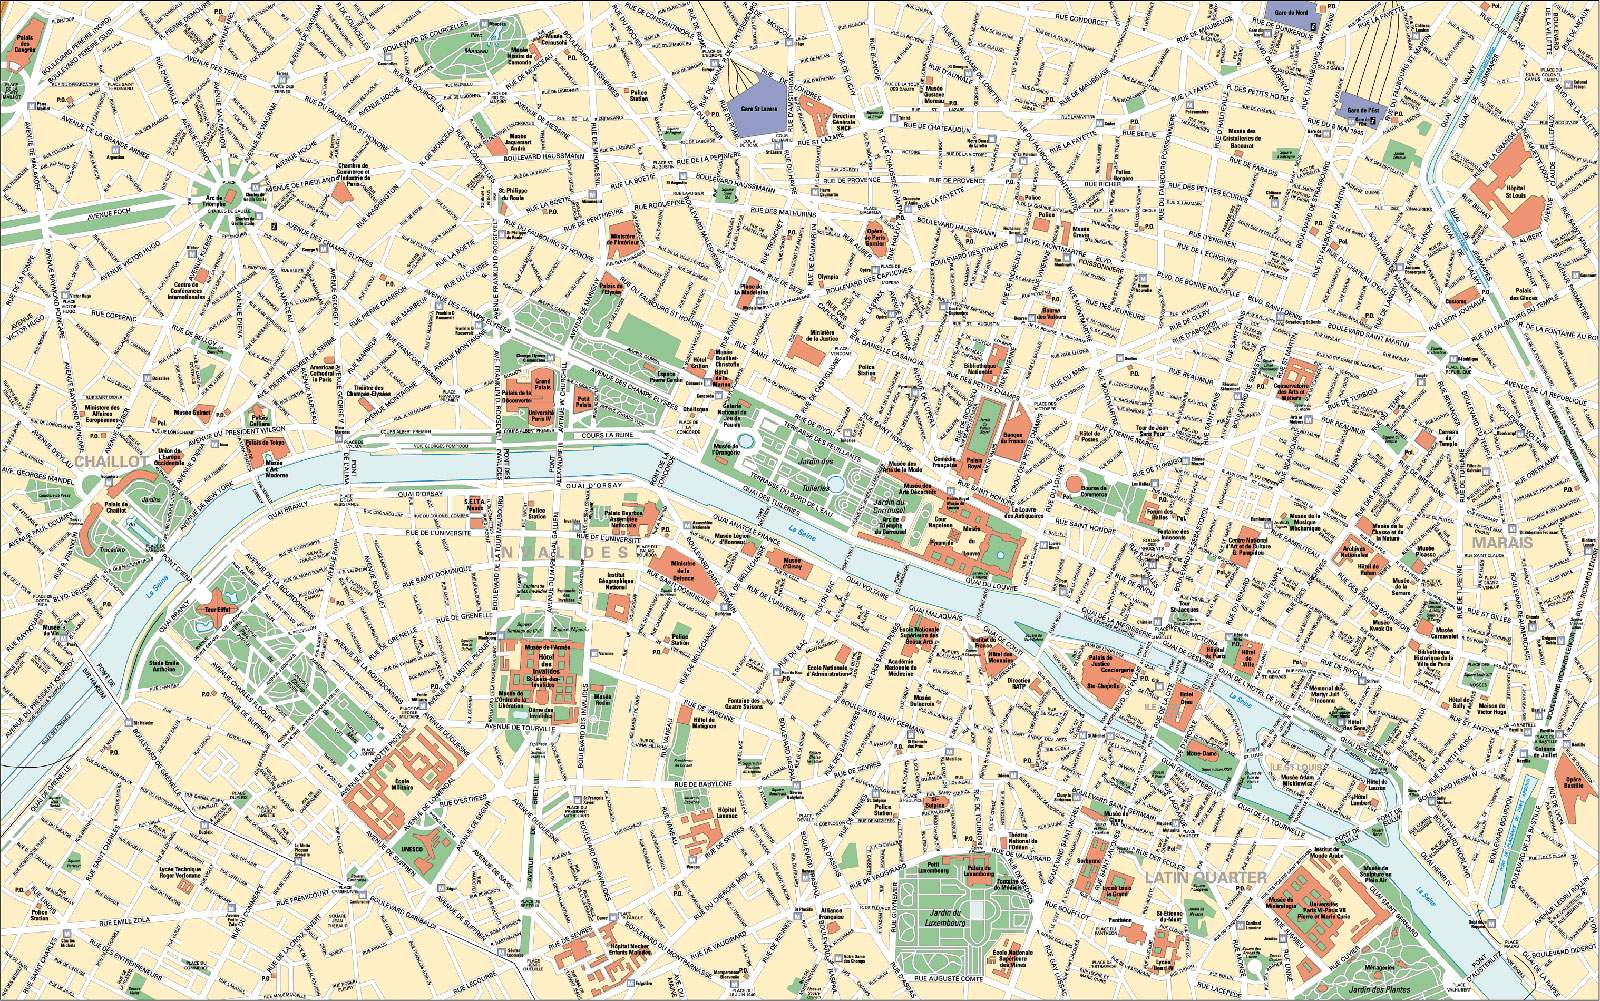 Large Paris Maps For Free Download And Print | High-Resolution And - Paris Street Map Printable